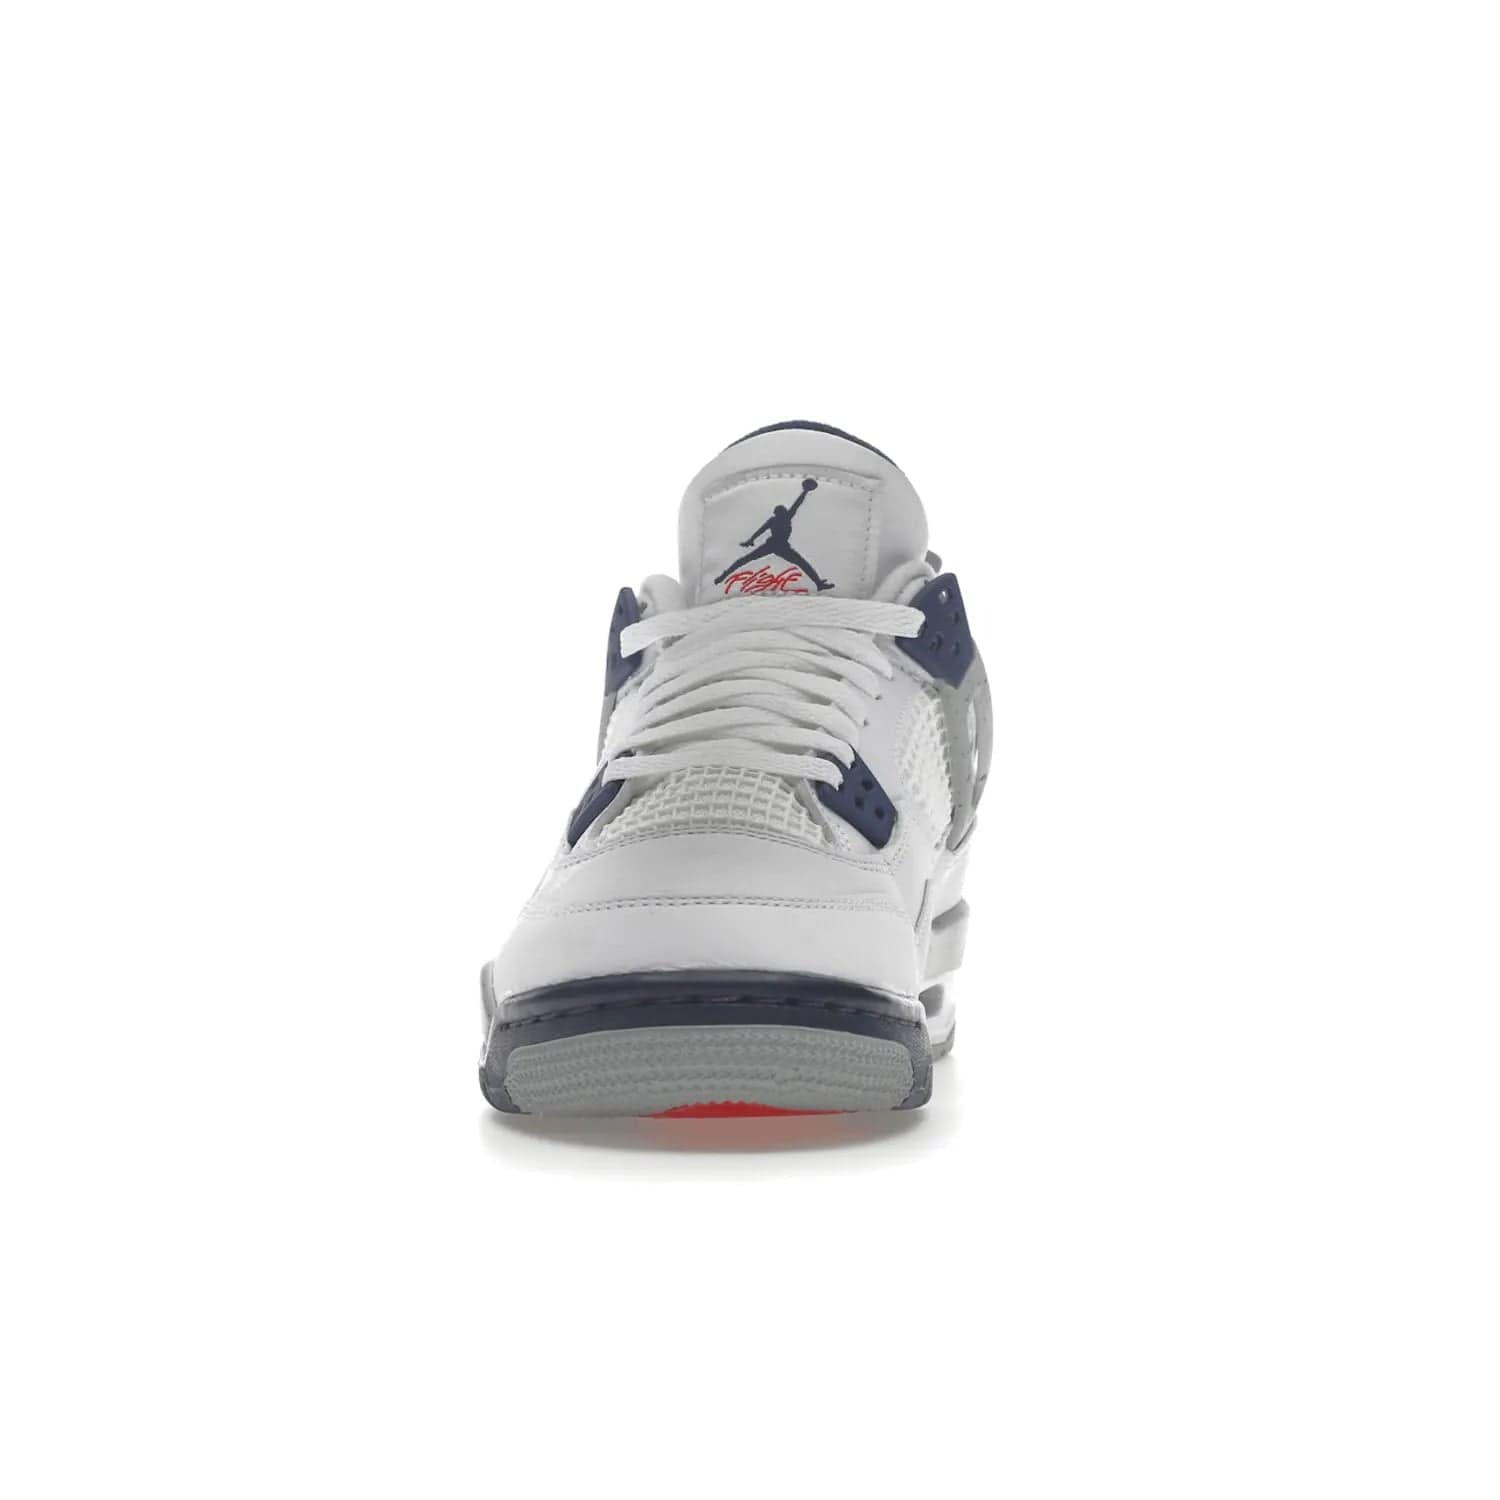 Jordan 4 Retro Midnight Navy (GS) - Image 11 - Only at www.BallersClubKickz.com - Shop the Air Jordan 4 Retro Midnight Navy GS. The white leather upper features black support wings & heel tab, navy eyelets & woven tongue tag with Jumpman logos. The midsole features two-tone polyurethane insole & AIR units in the heel & forefoot. Get the white/midnight navy/light smoke grey/fire colorway & show off your style.